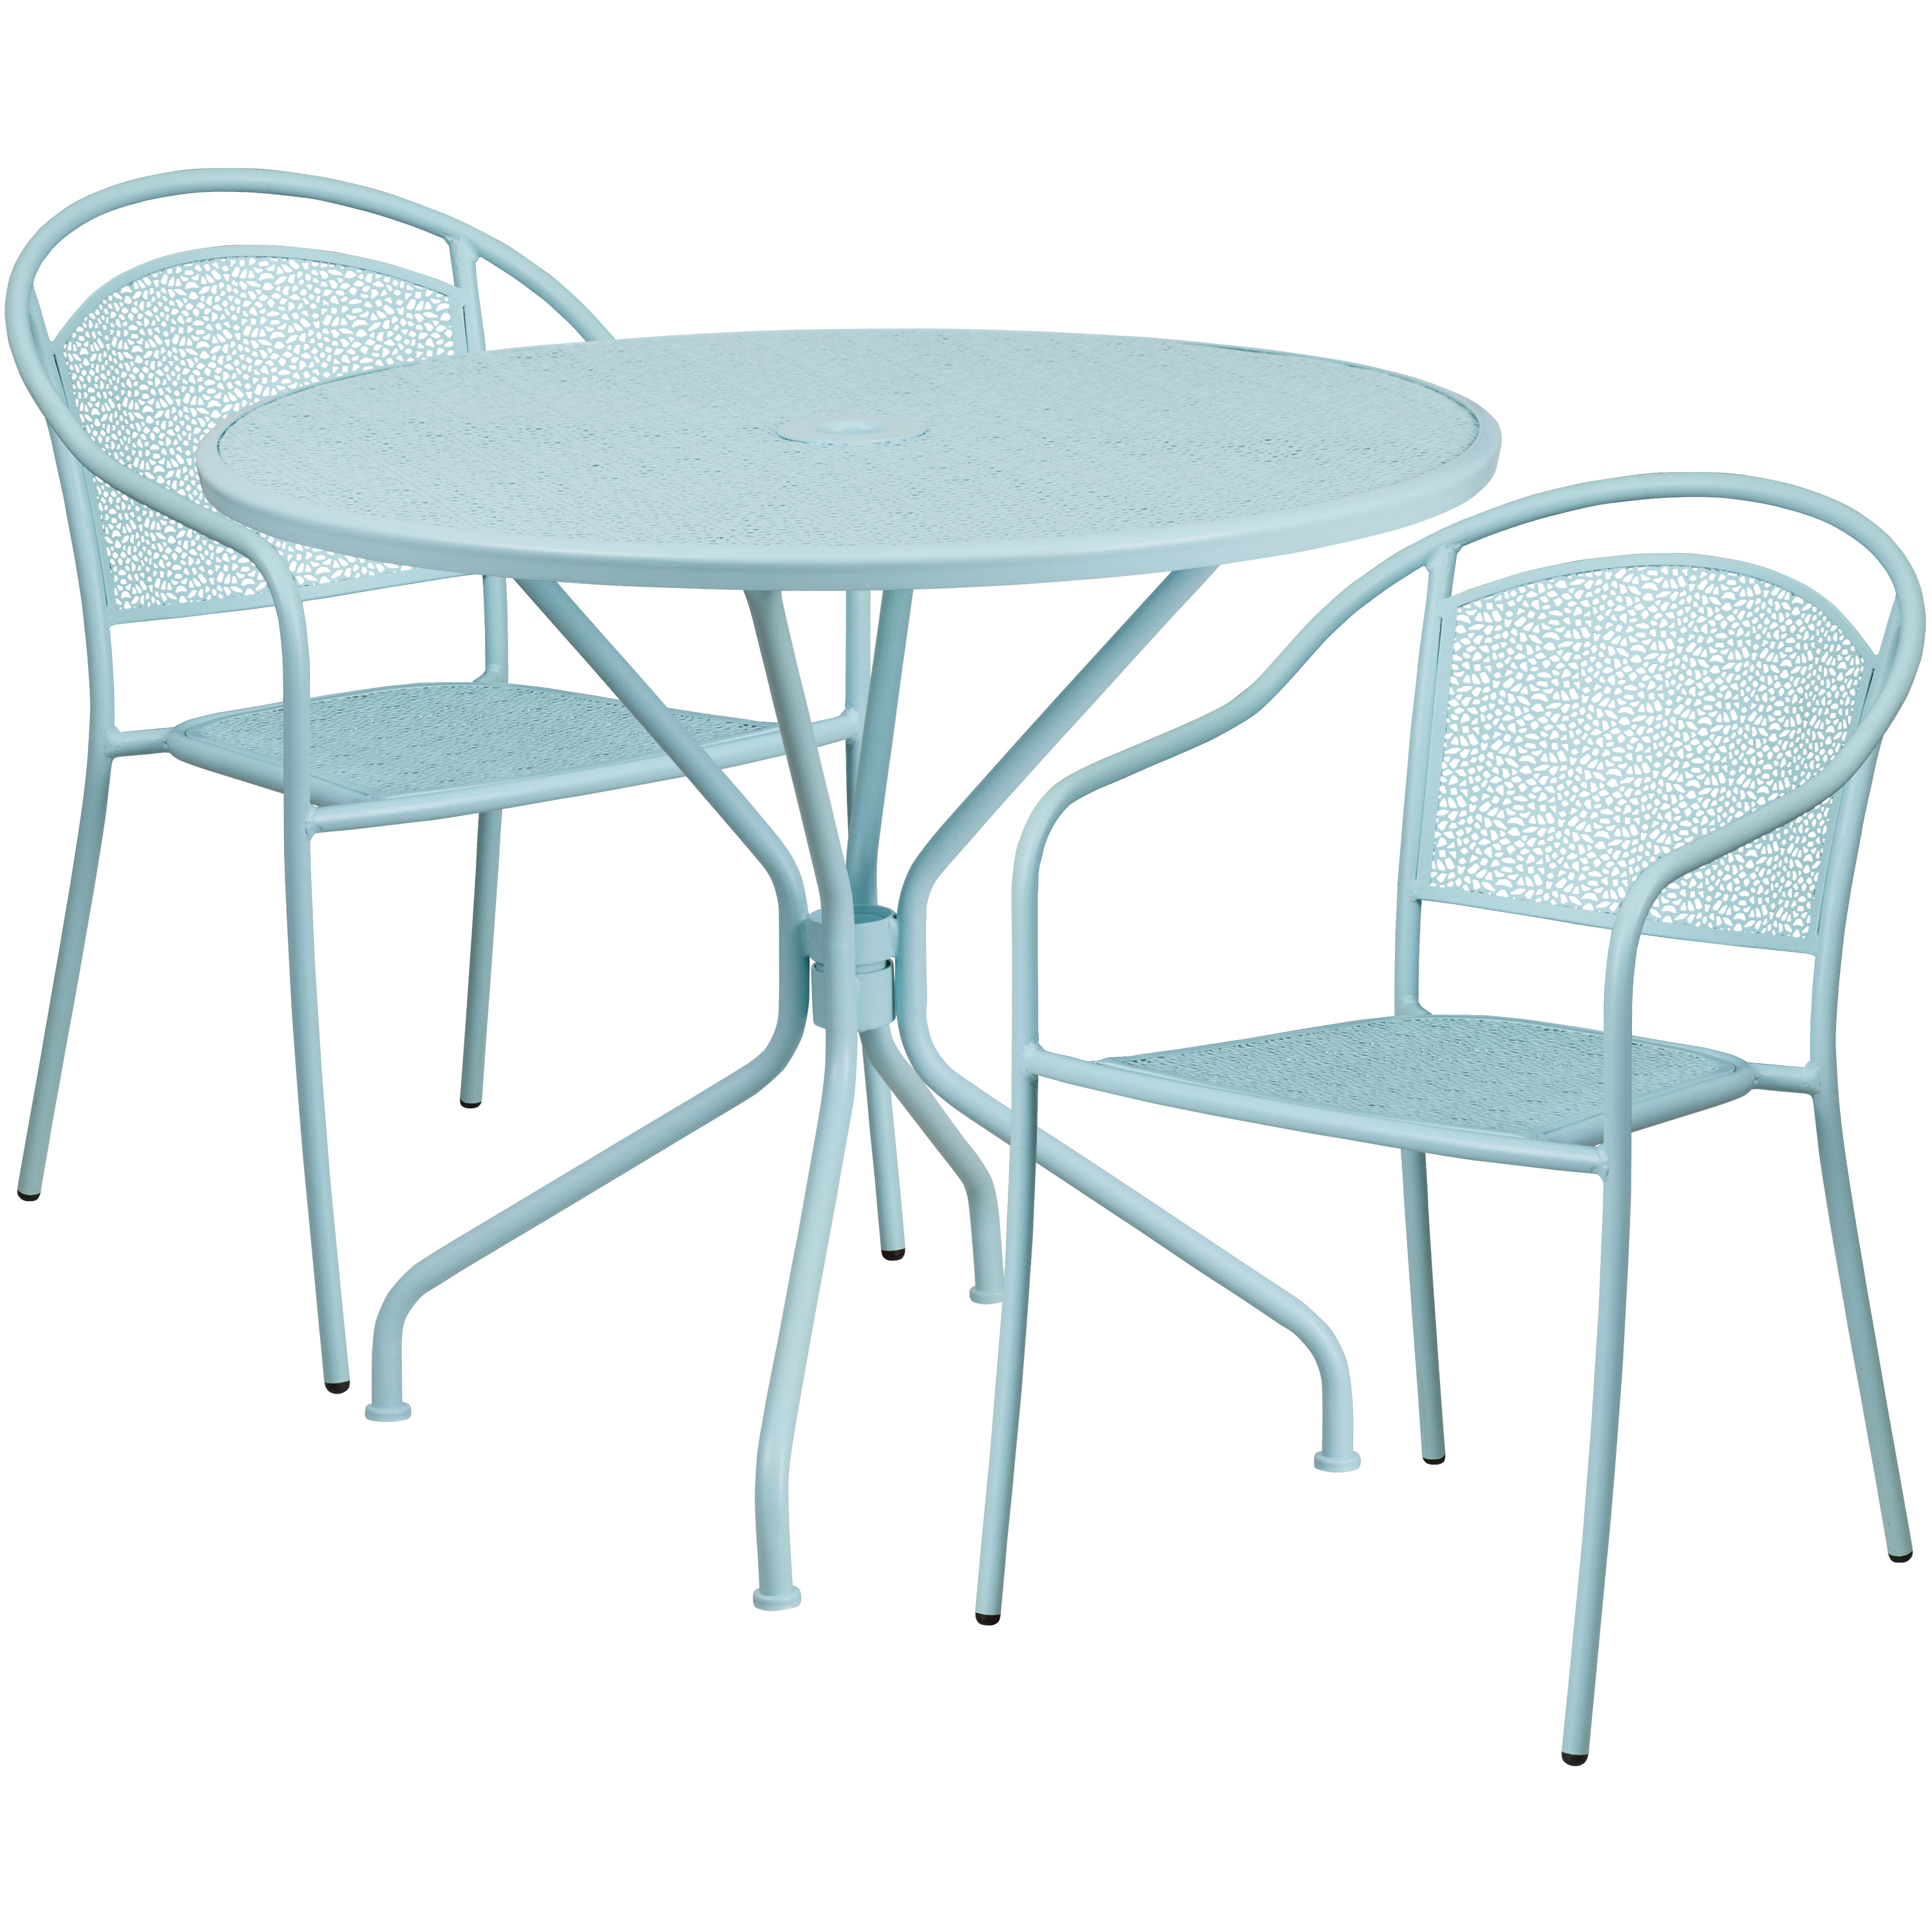 Flash Furniture CO-35RD-03CHR2-SKY-GG 35.25" Round Sky Blue Indoor/Outdoor Steel Patio Table Set with 2 Round Back Chairs